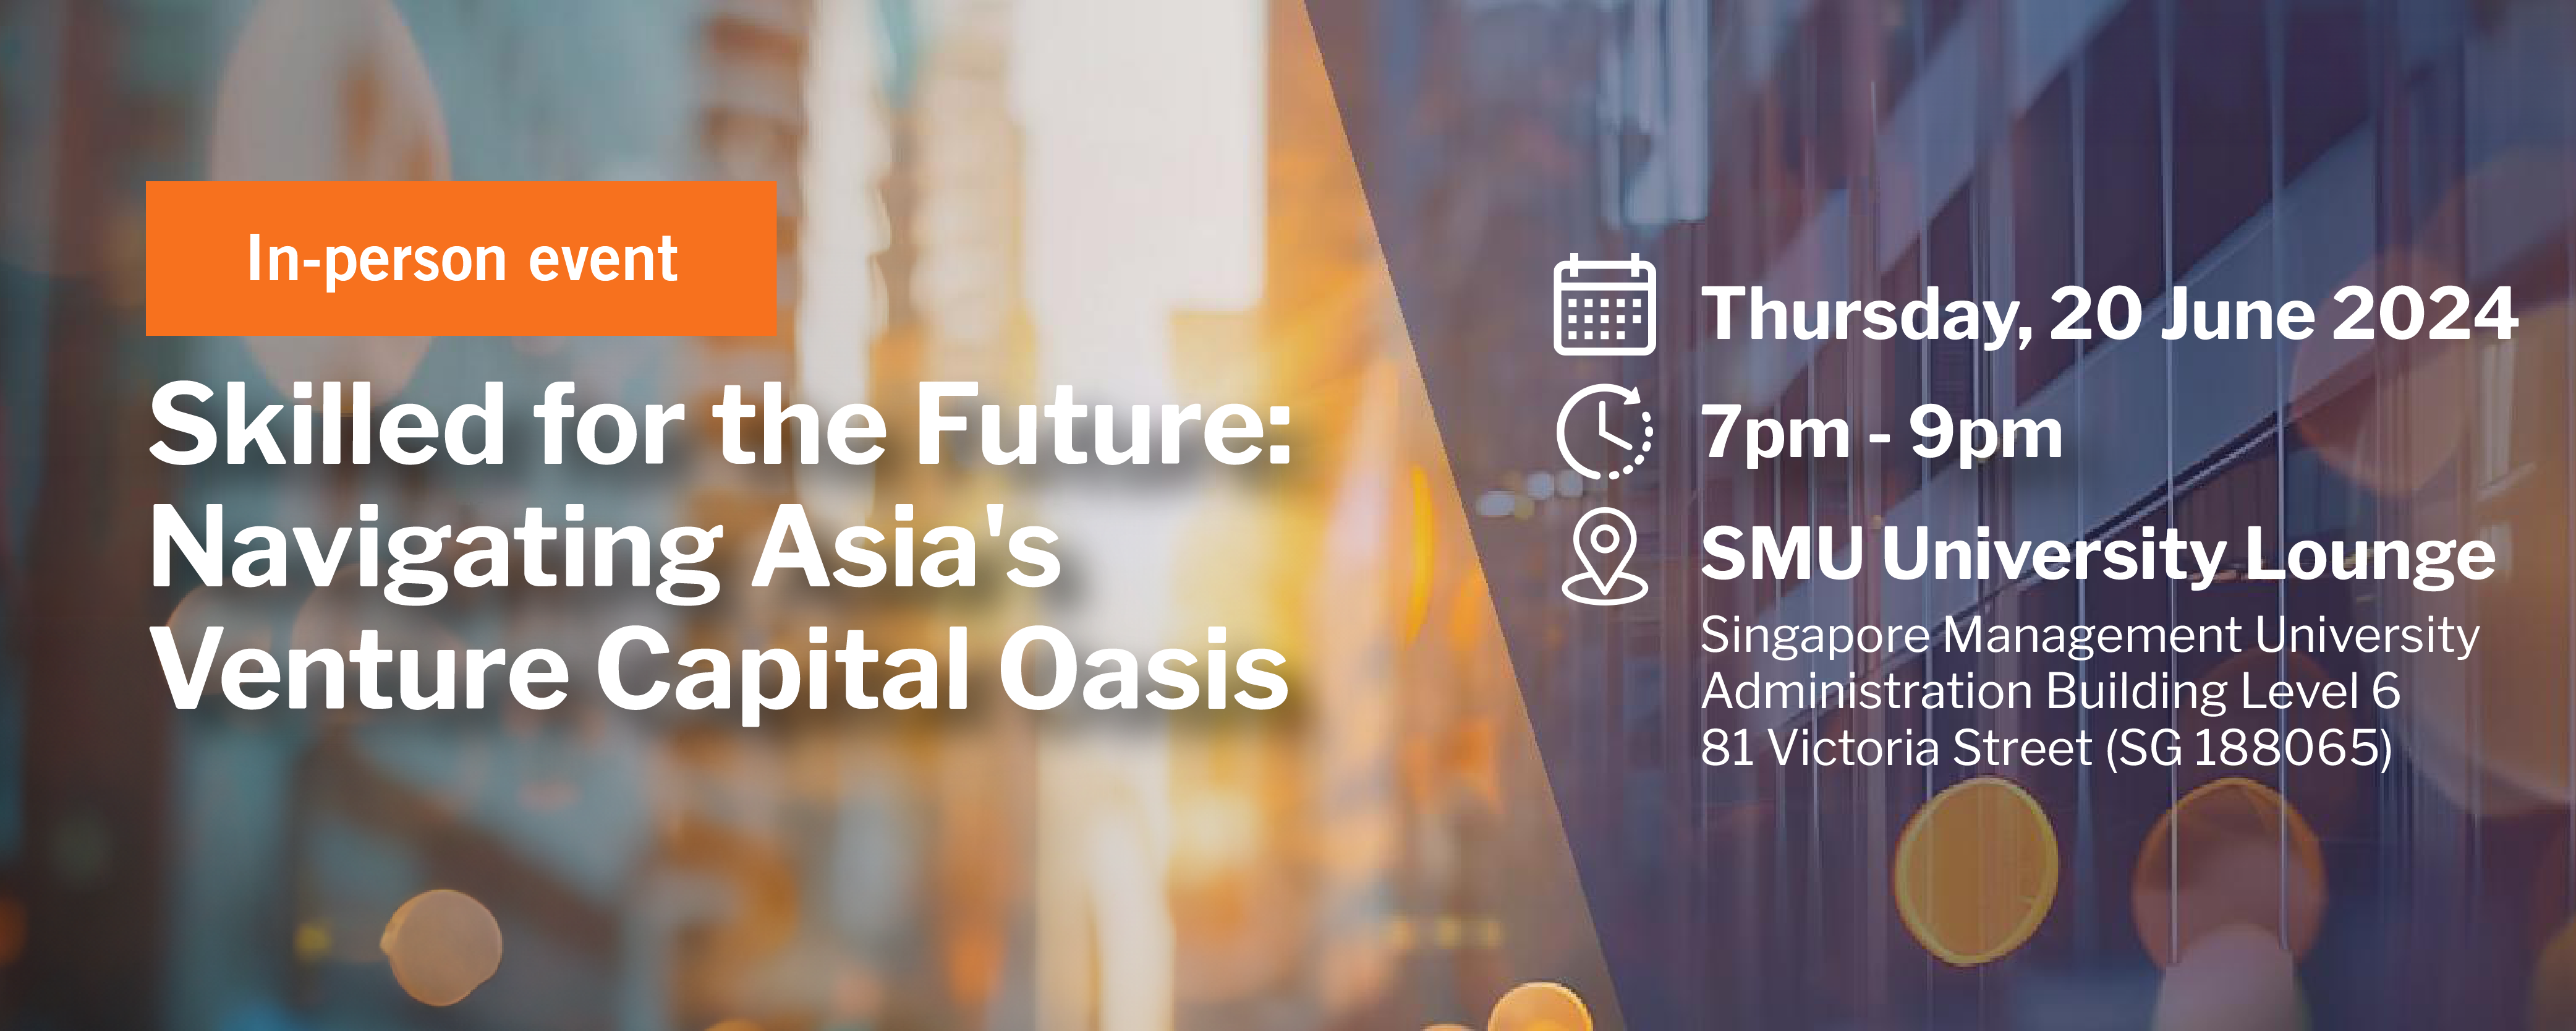 Skilled for the Future: Navigating Asia's Venture Capital Oasis